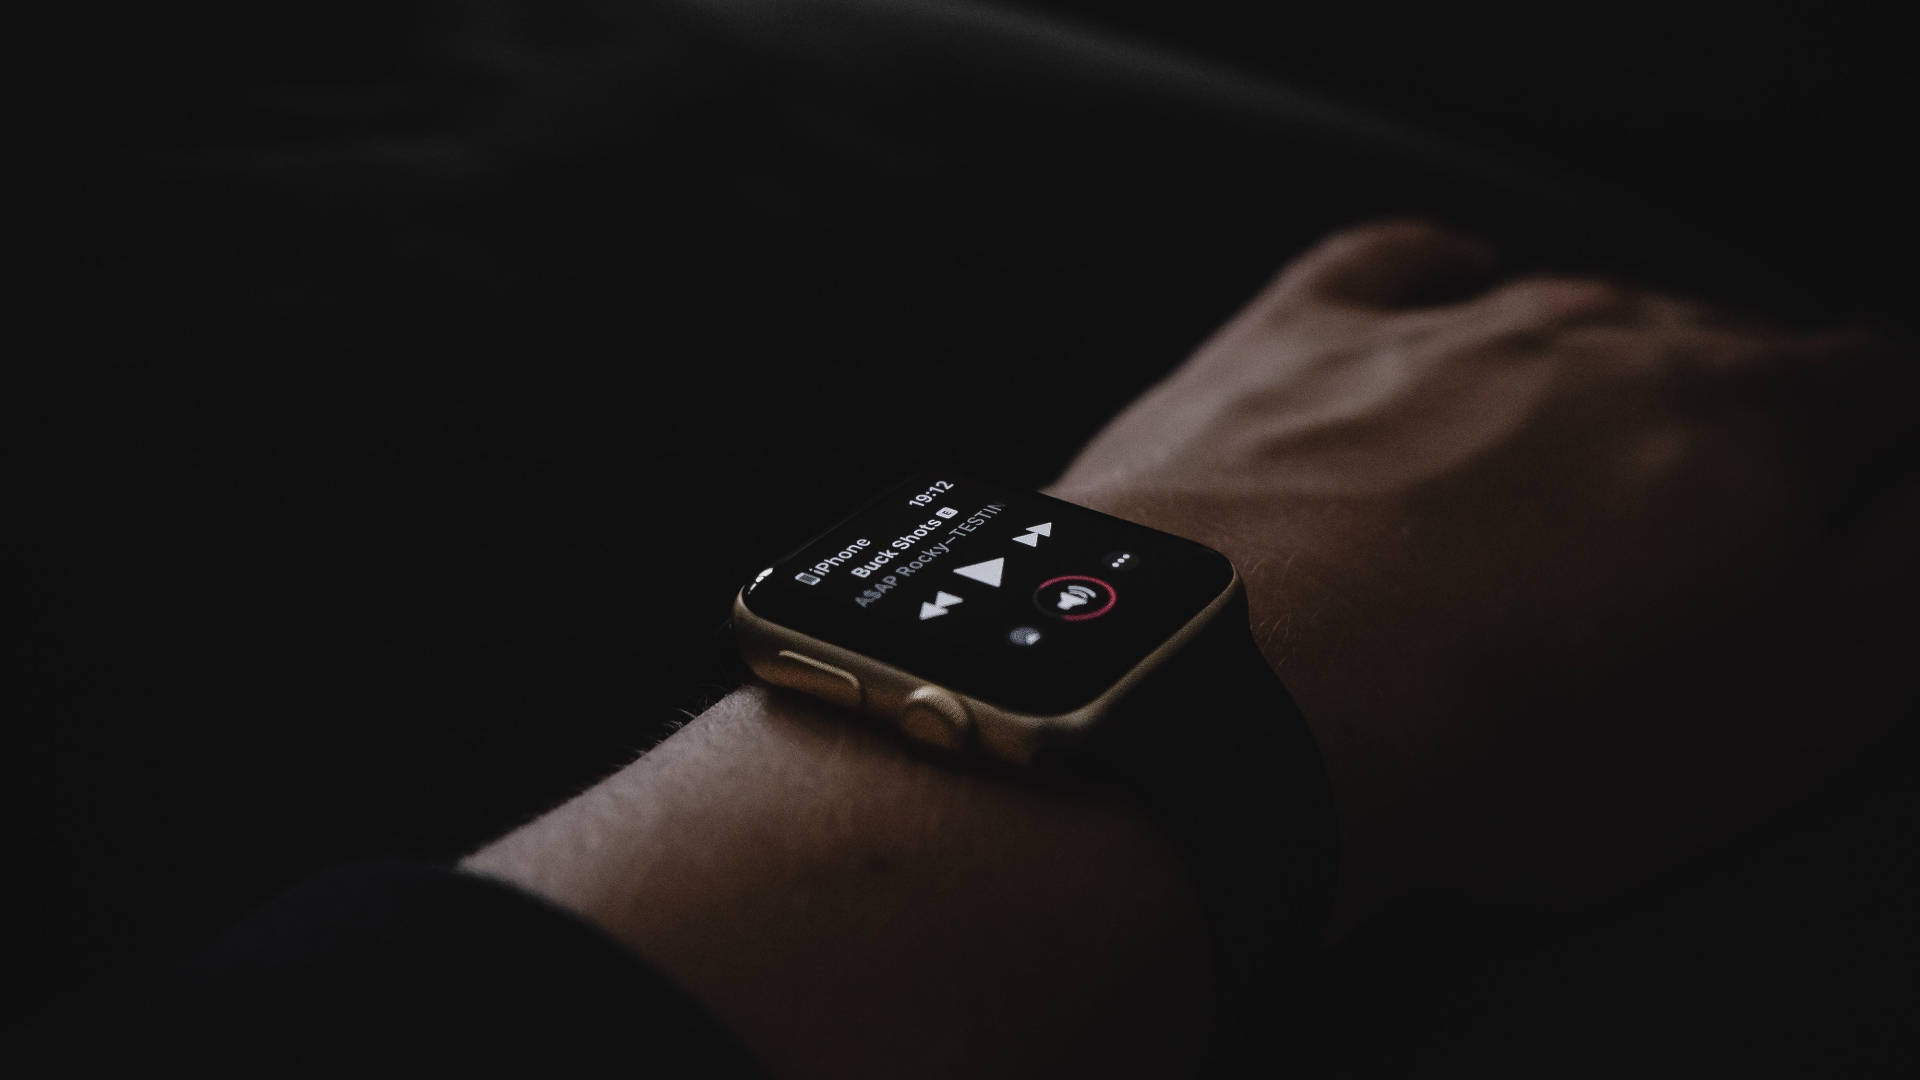 Apple Watch With Pitch-black Straps Background